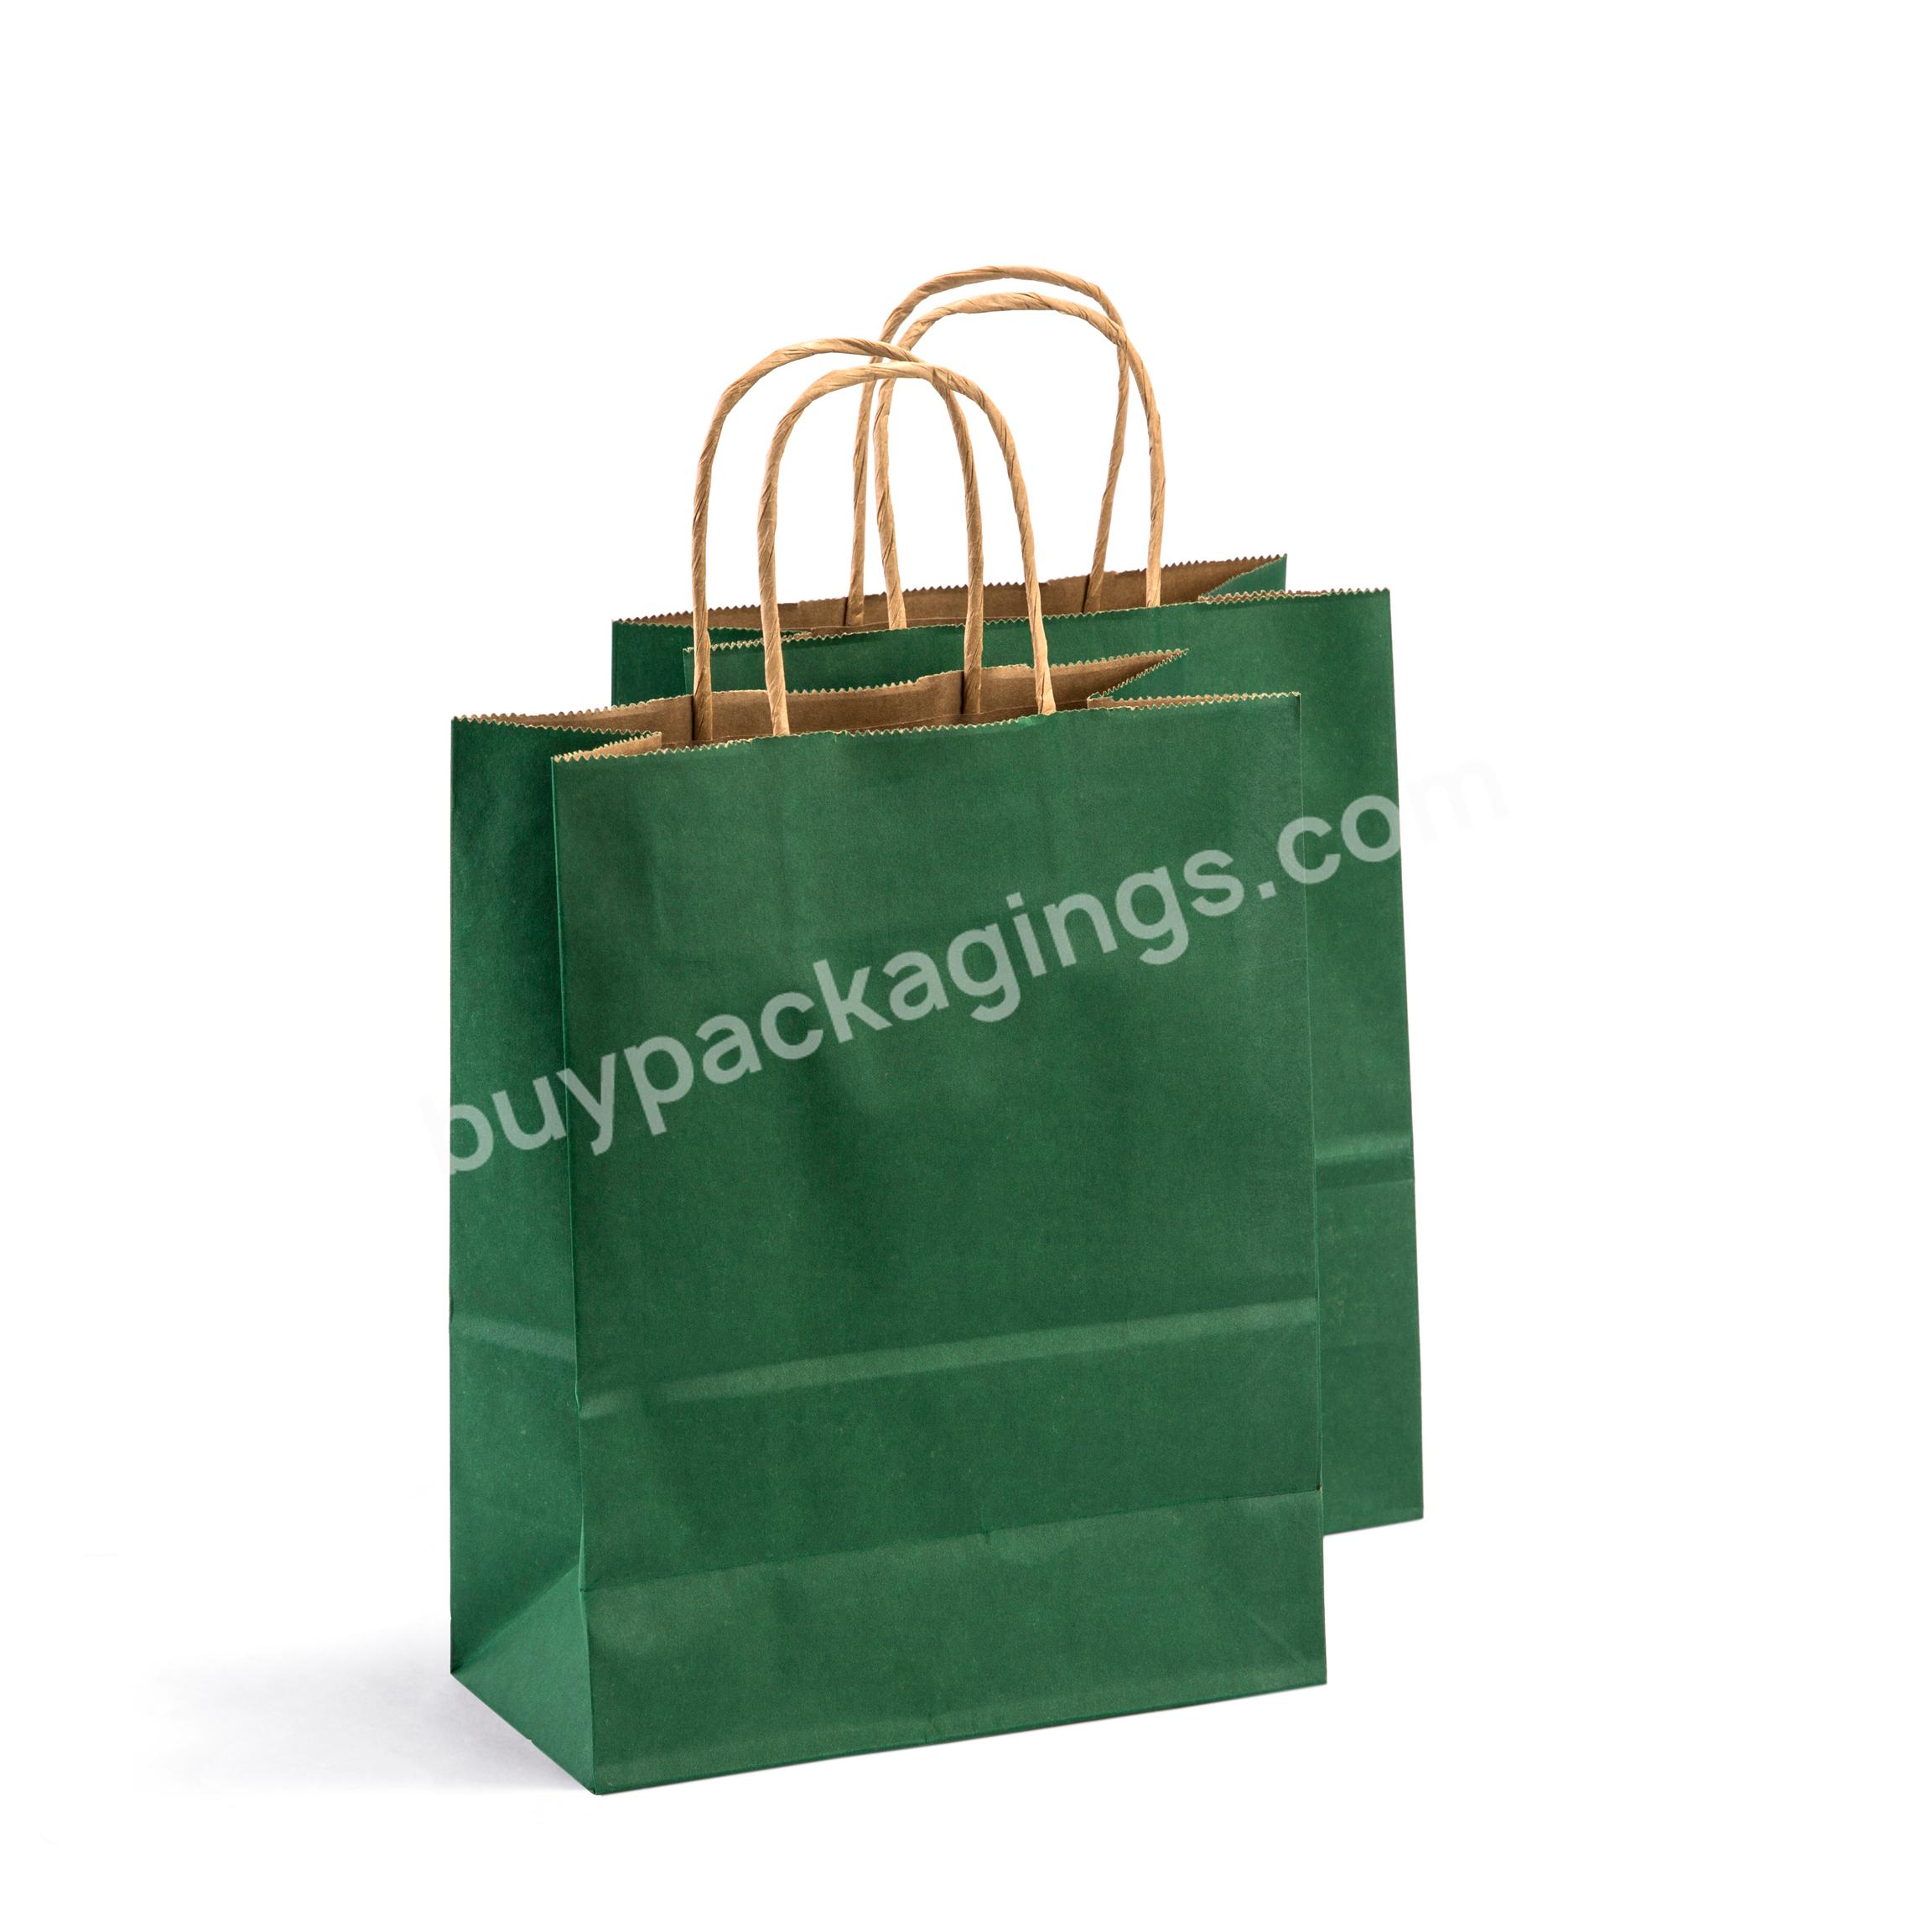 RRD Wholesale Biodegradable Brown Kraft Paper Packaging Takeaway Food Gift Shopping Cosmetic Coffee Tote Bags with Handles